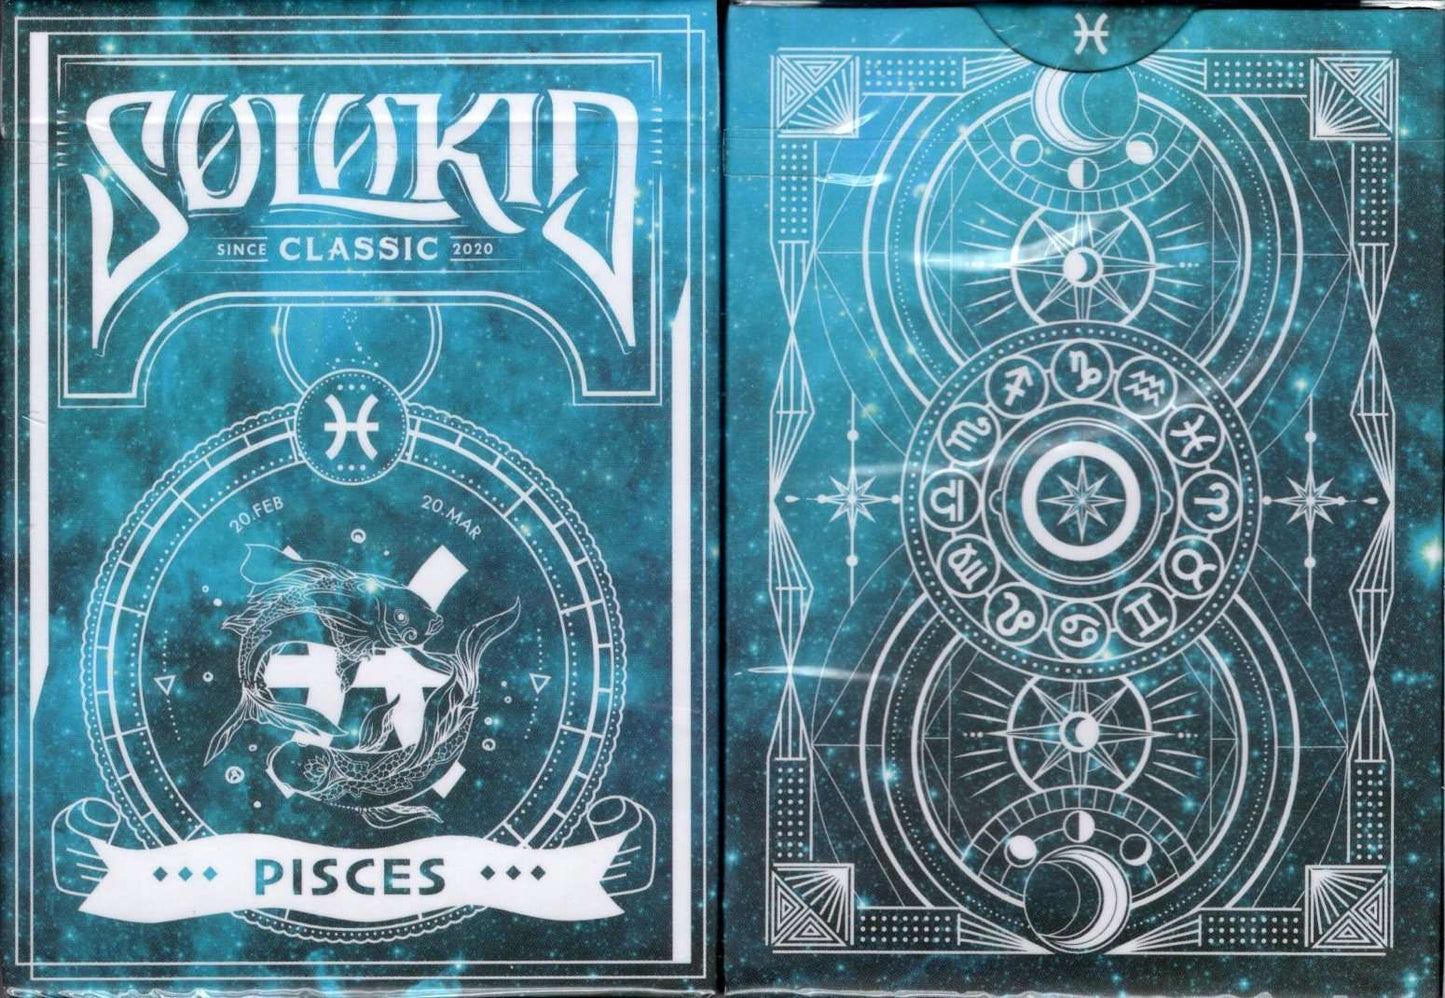 PlayingCardDecks.com-Solokid Constellation Series v2 Pisces Playing Cards MPC